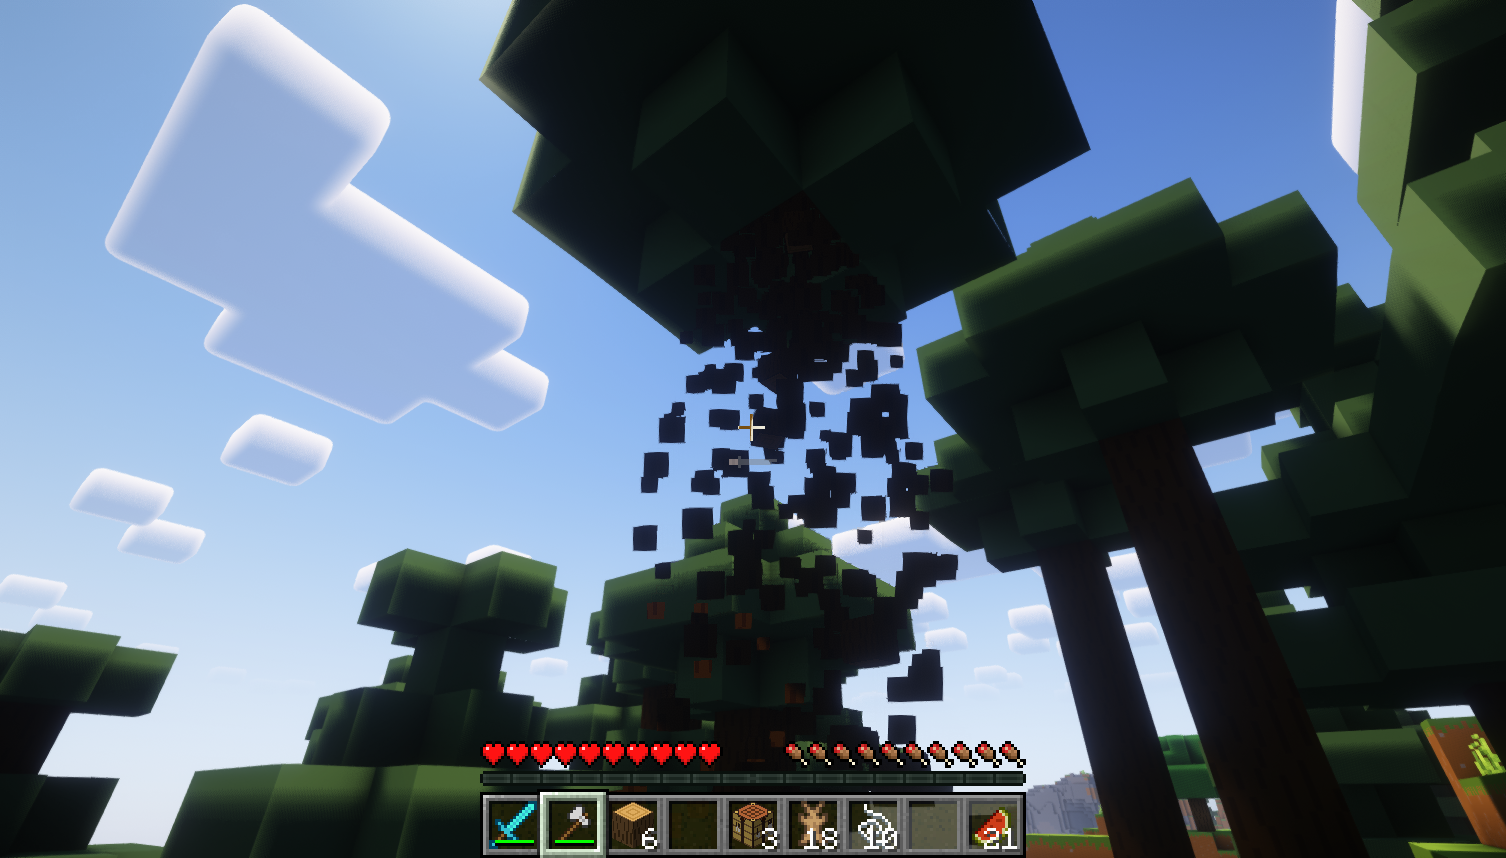 Minecraft screenshot showing a spruce tree in a spruce forest